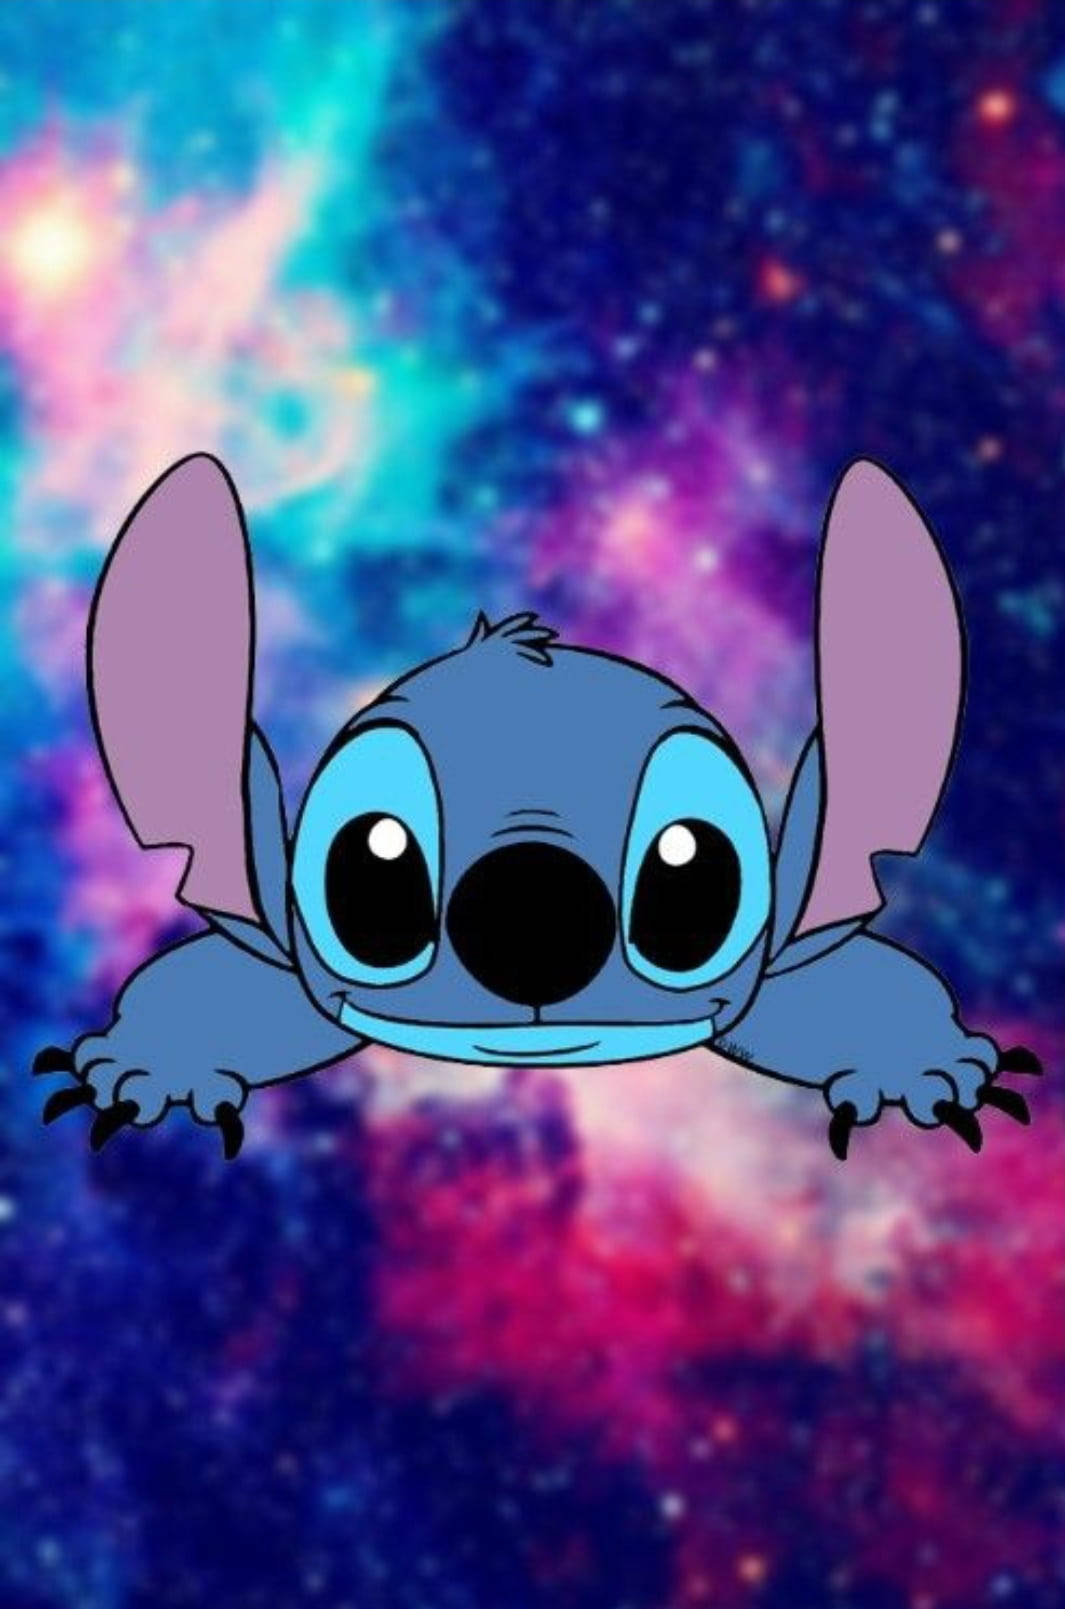 Stitch From Disney In Outer Space Wallpaper